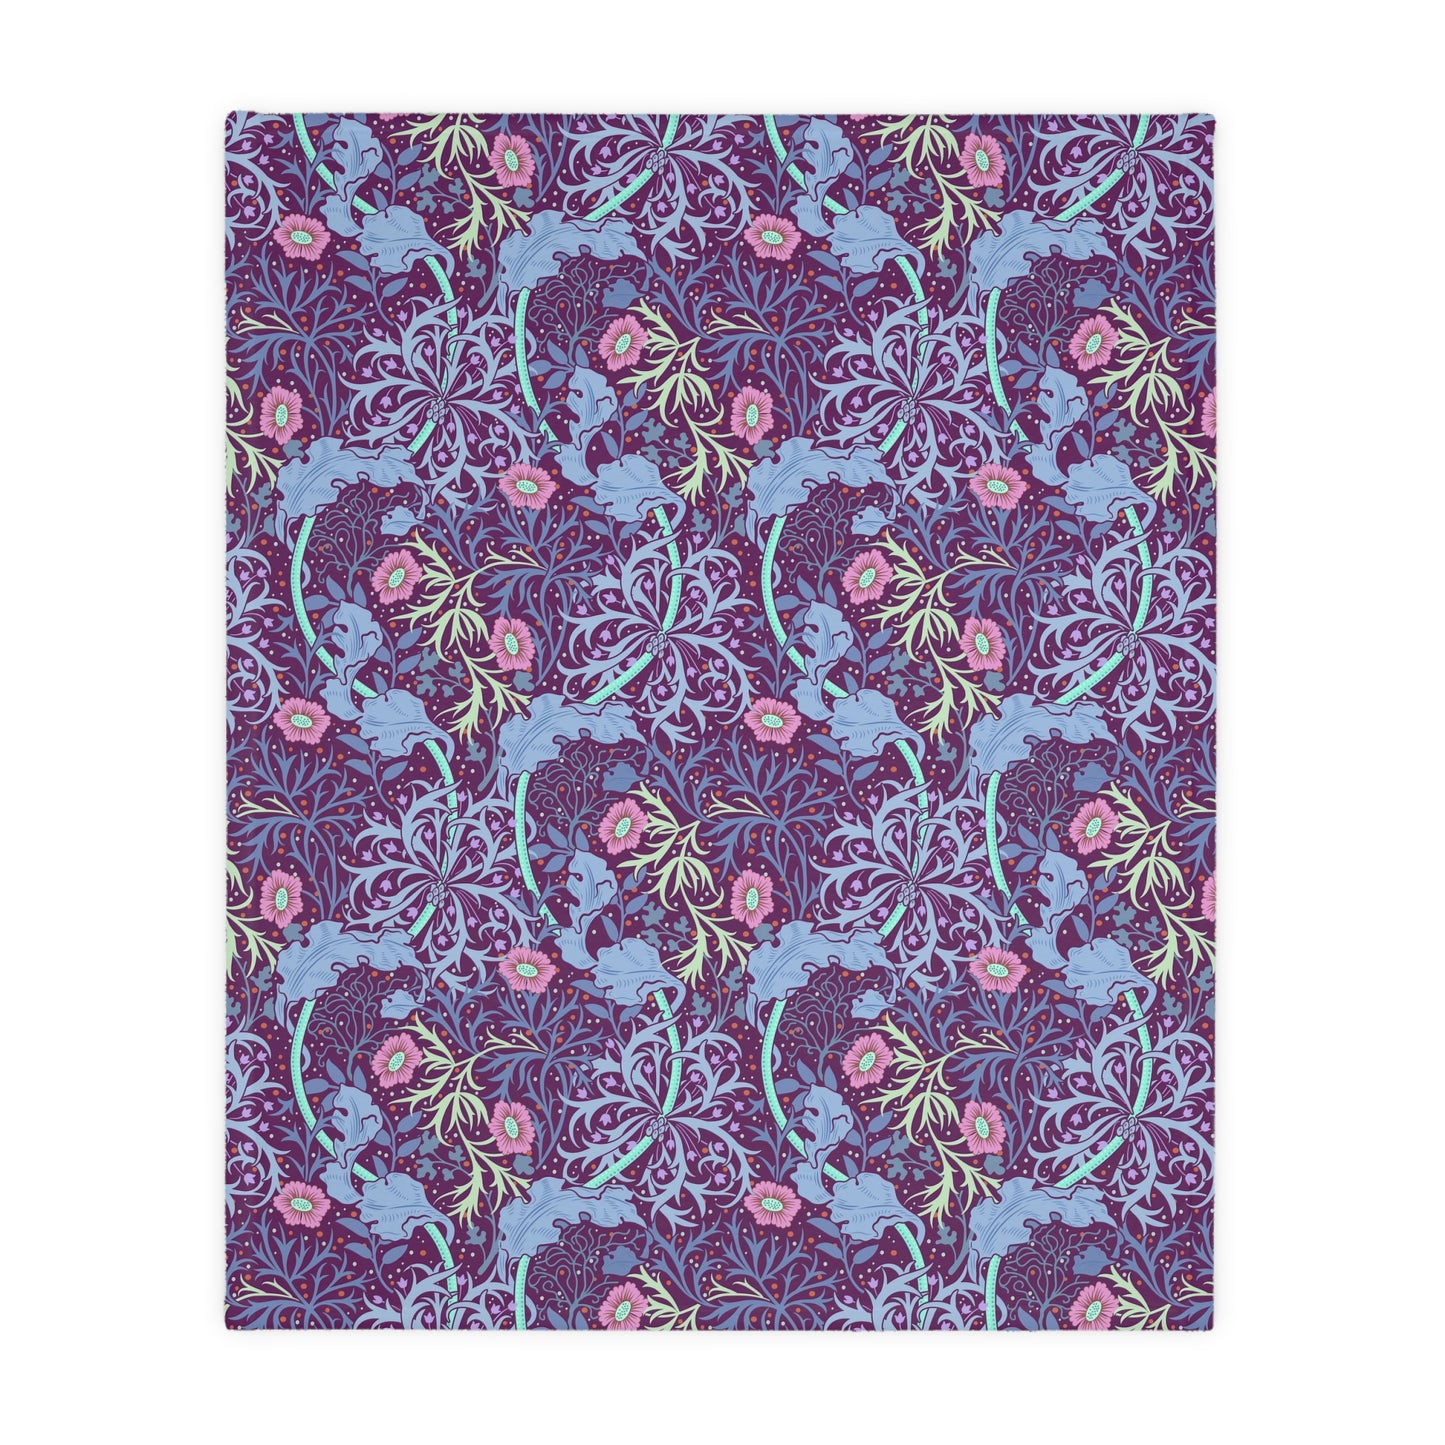 william-morris-co-luxury-velveteen-minky-blanket-two-sided-print-seaweed-collection-15